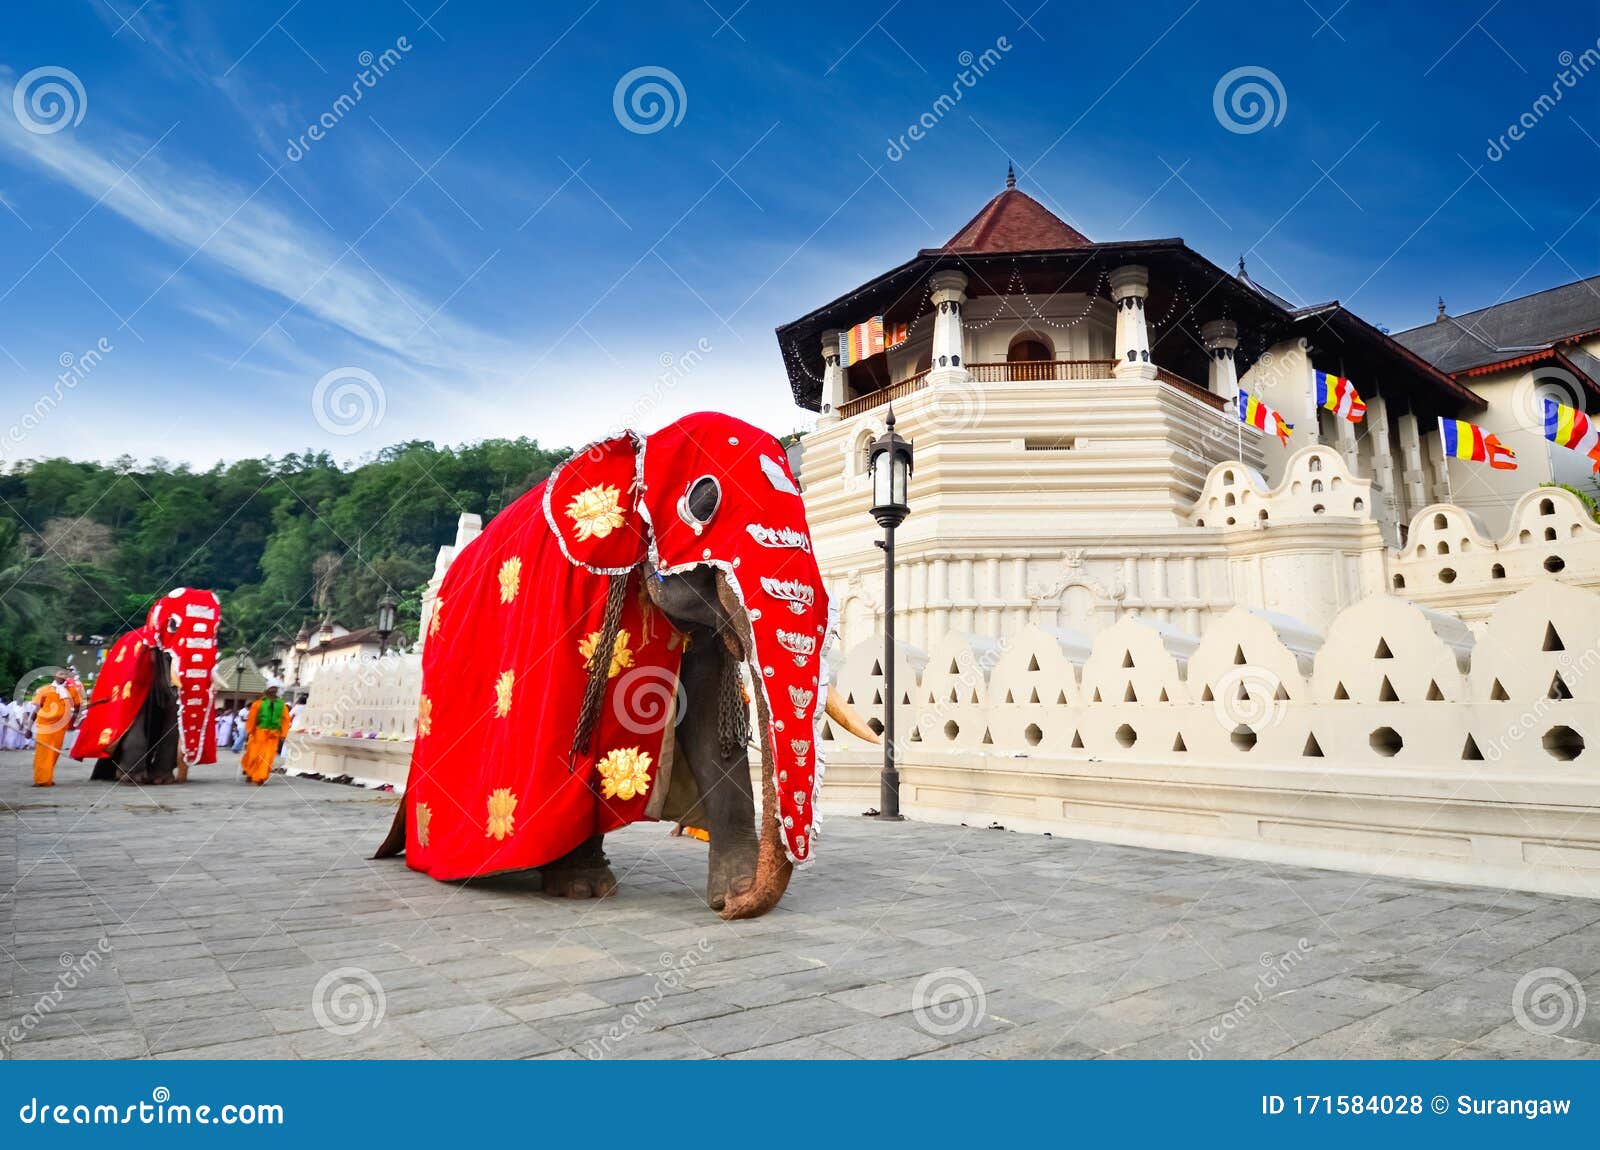 temple of the sacred tooth relic buddhist temple in the city of kandy, sri lanka, kandy